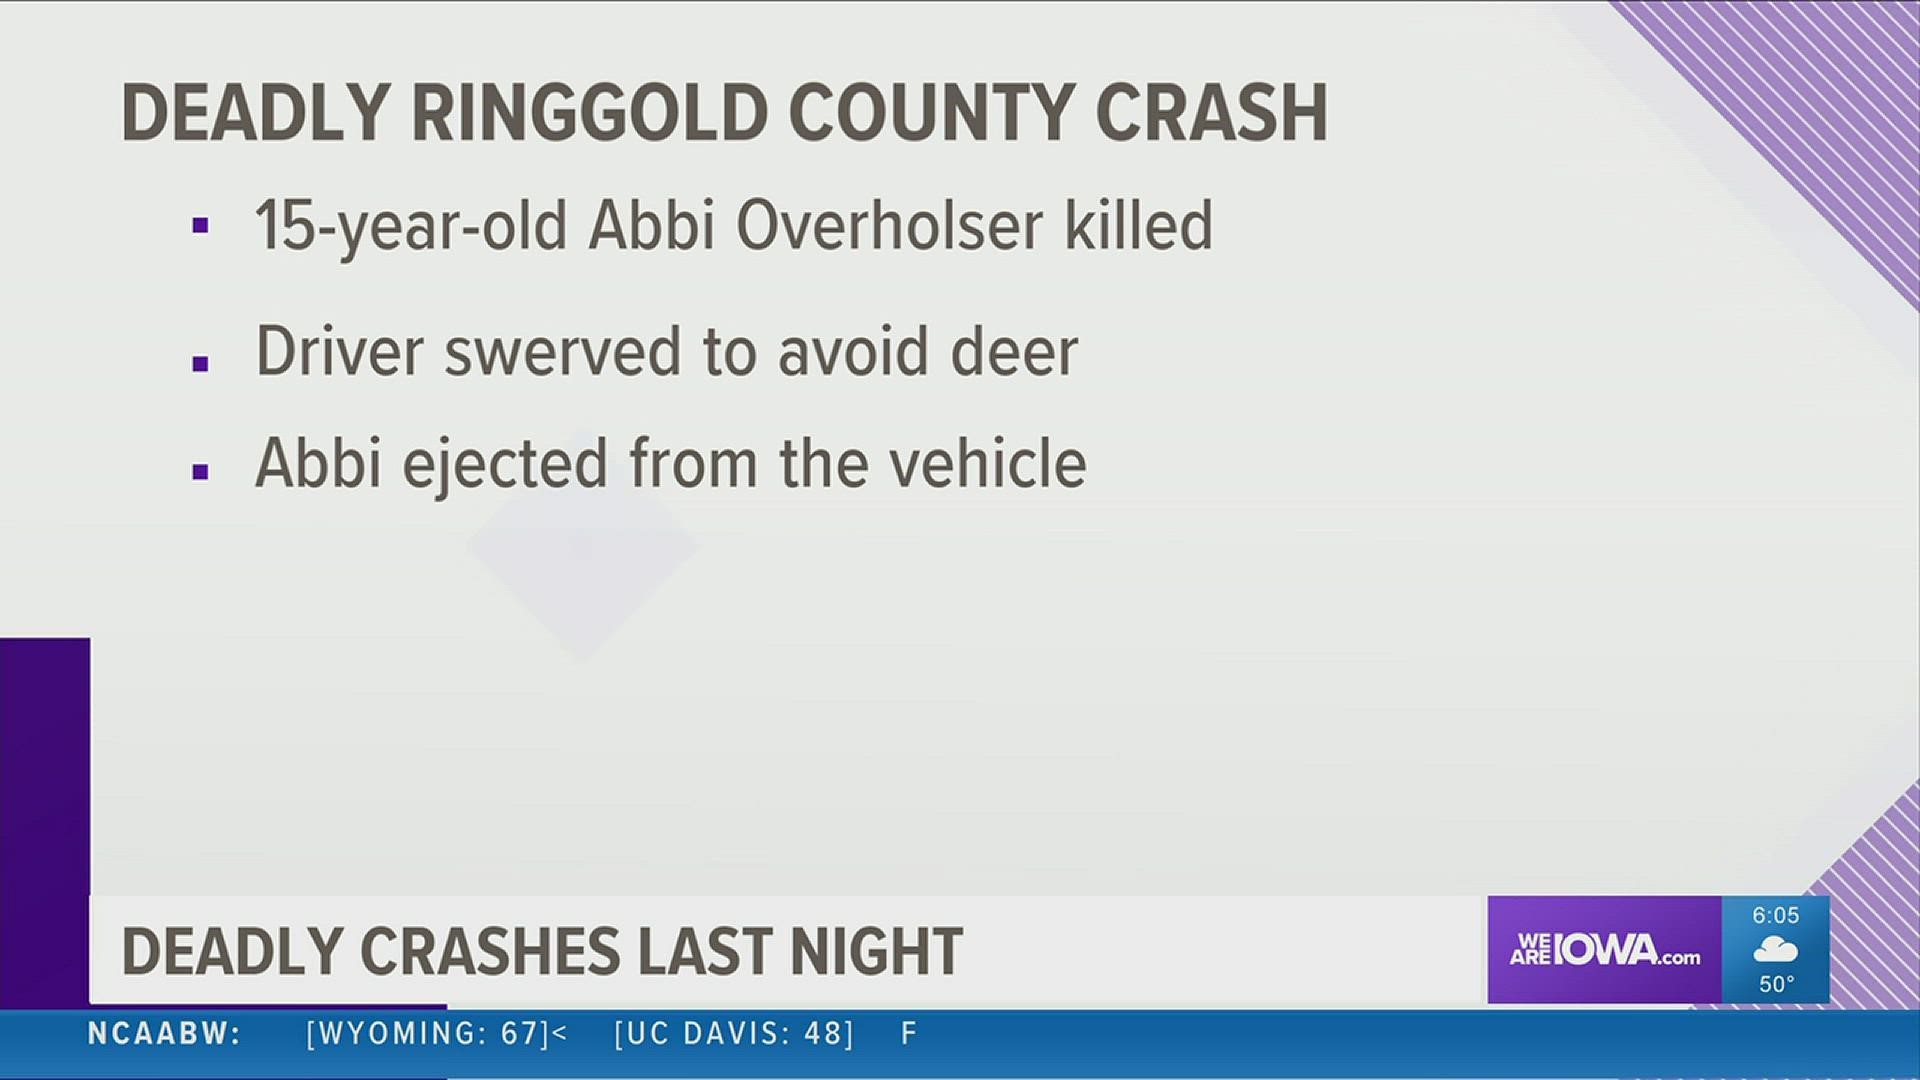 According to the crash report the driver swerved to avoid a deer.